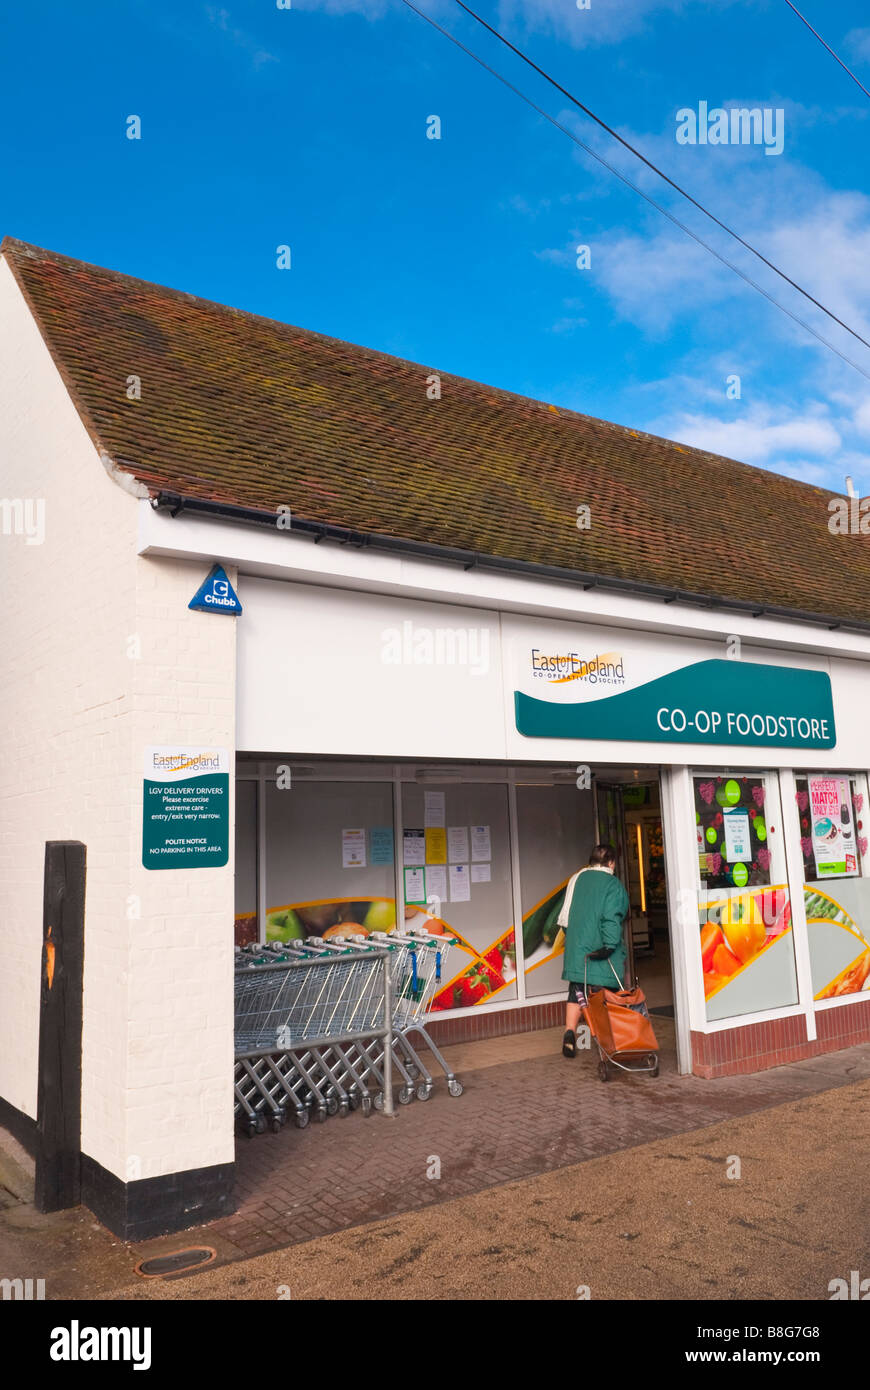 The Co-op foodstore shop store in Long Melford,Suffolk,Uk with customer entering shop Stock Photo